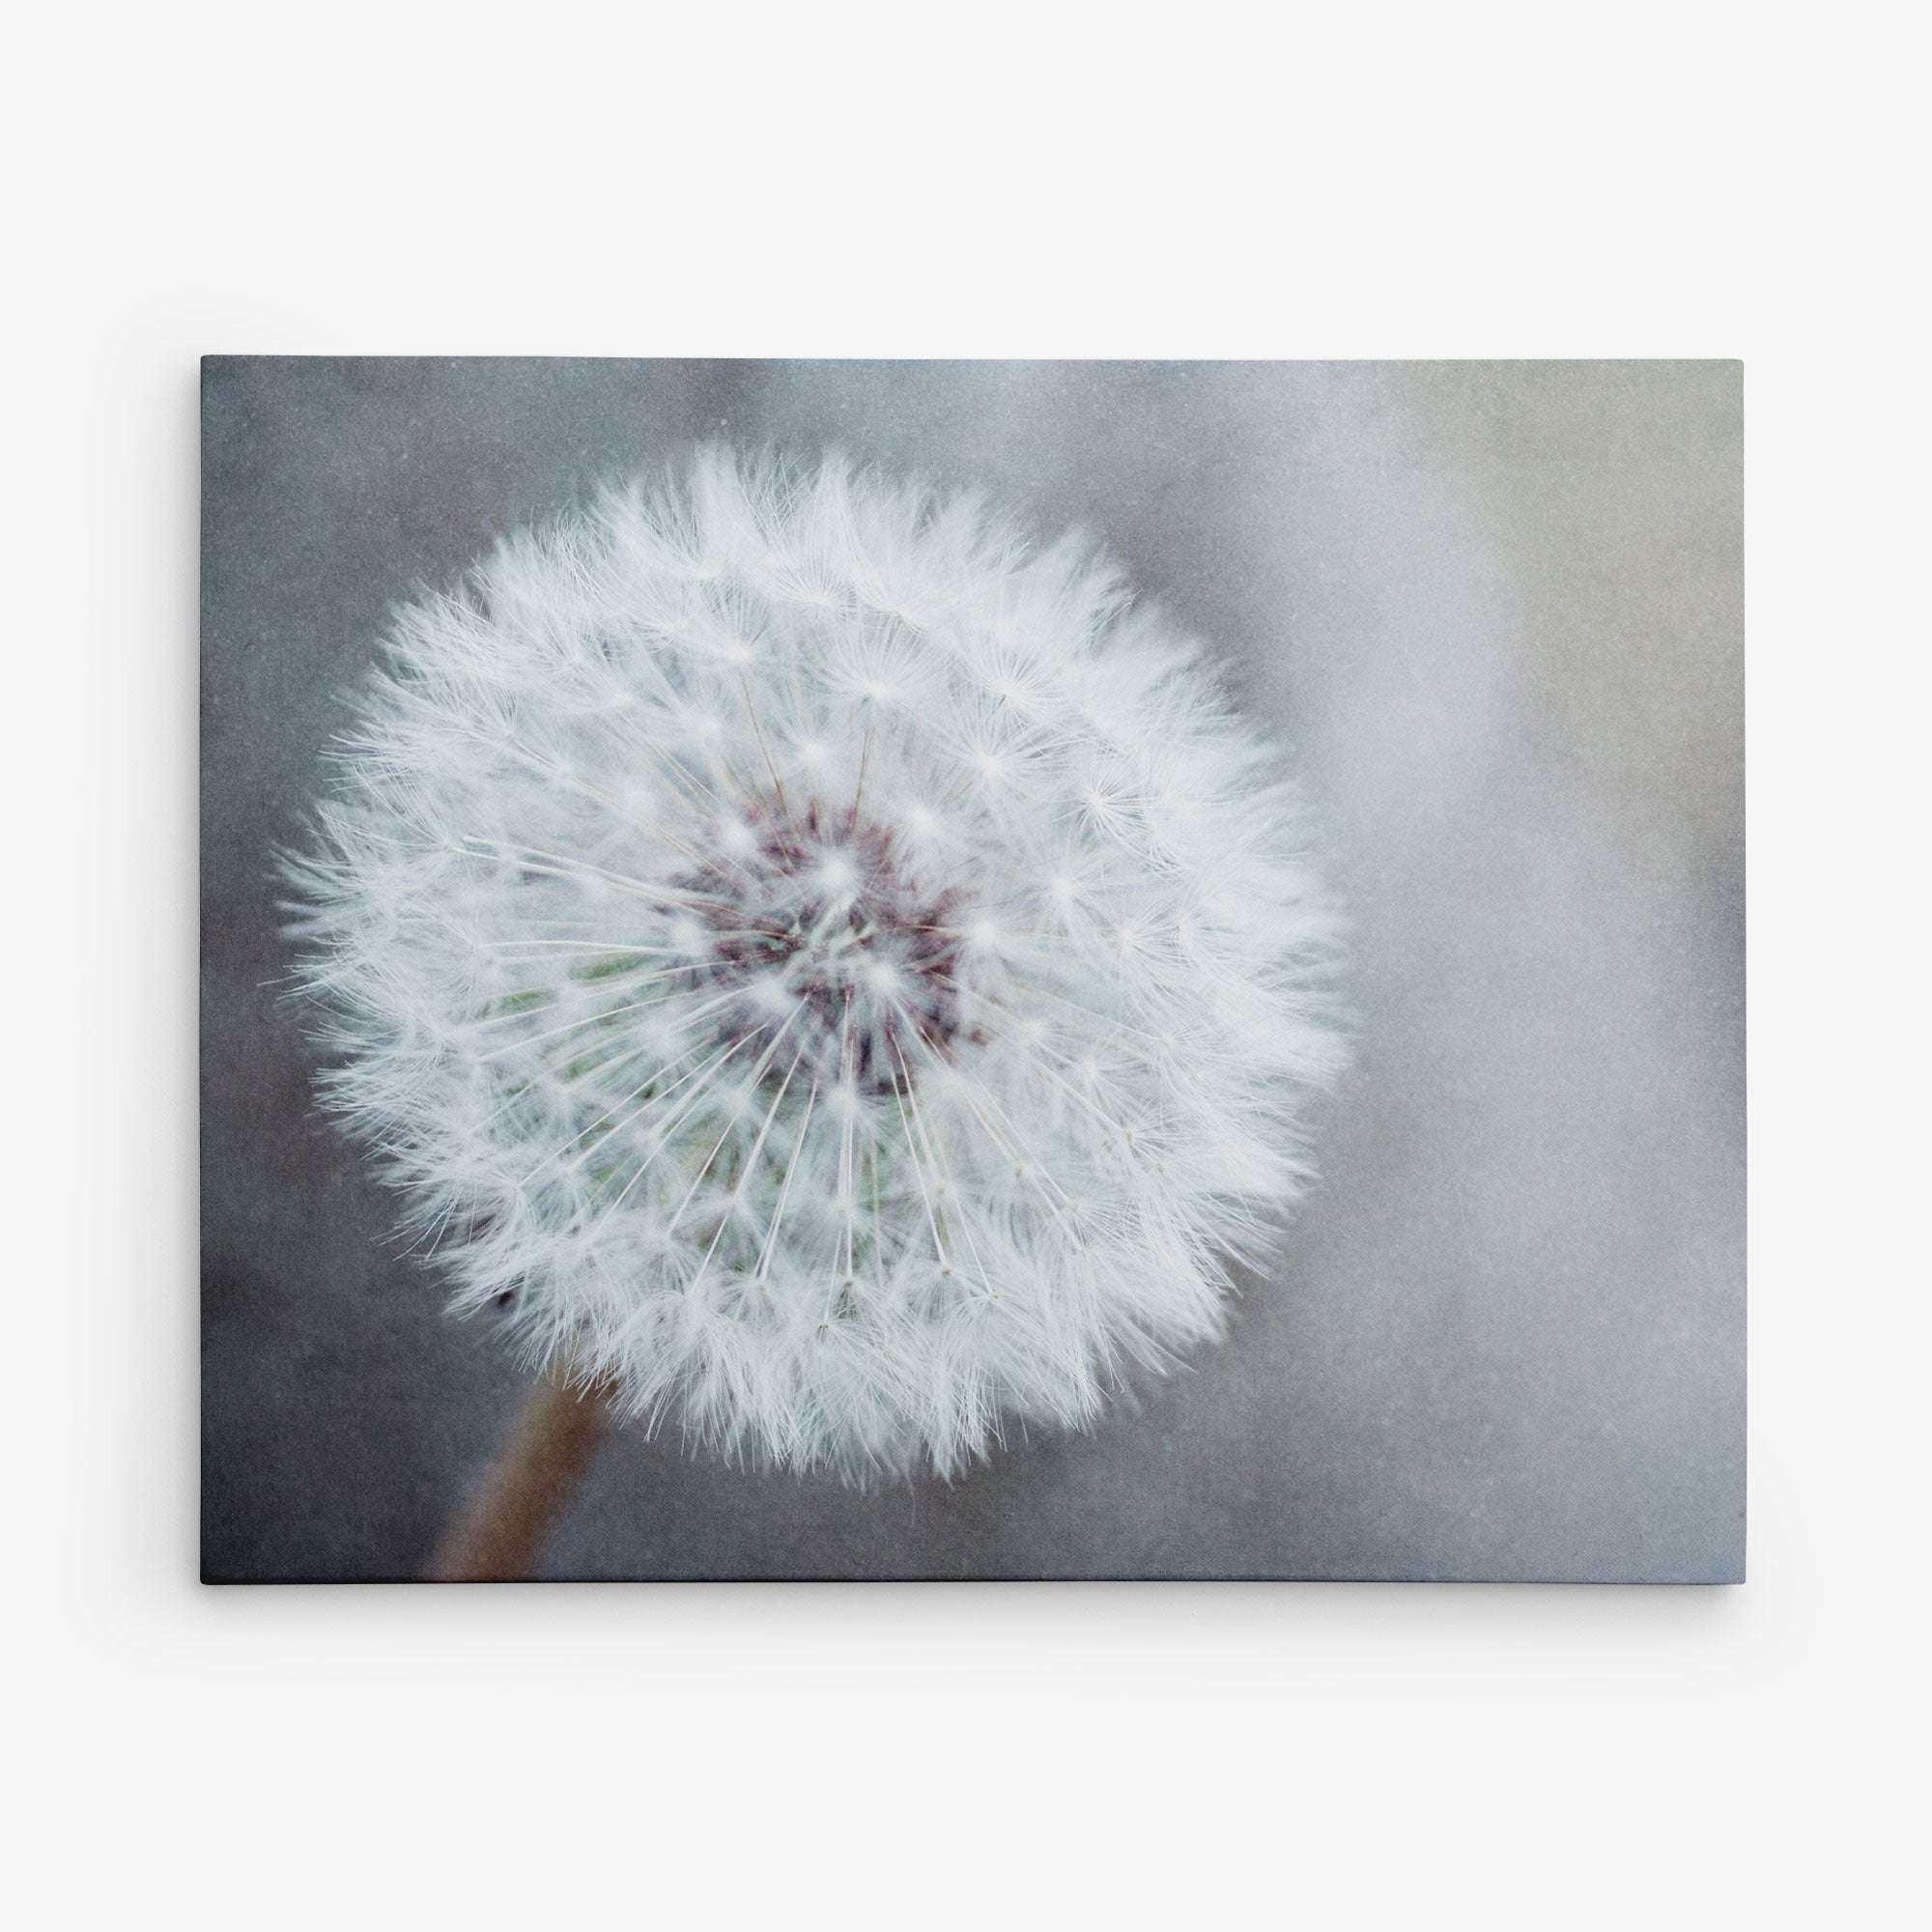 Close-up image of a white dandelion seed head against a blurred grayish background. The delicate seeds are arranged in a spherical shape, ready to be carried away by the wind. This soft and ethereal scene would make an enchanting Offley Green Botanical Canvas Prints (Multiple Designs) - 11x14 inches and perfect botanical print for your home.